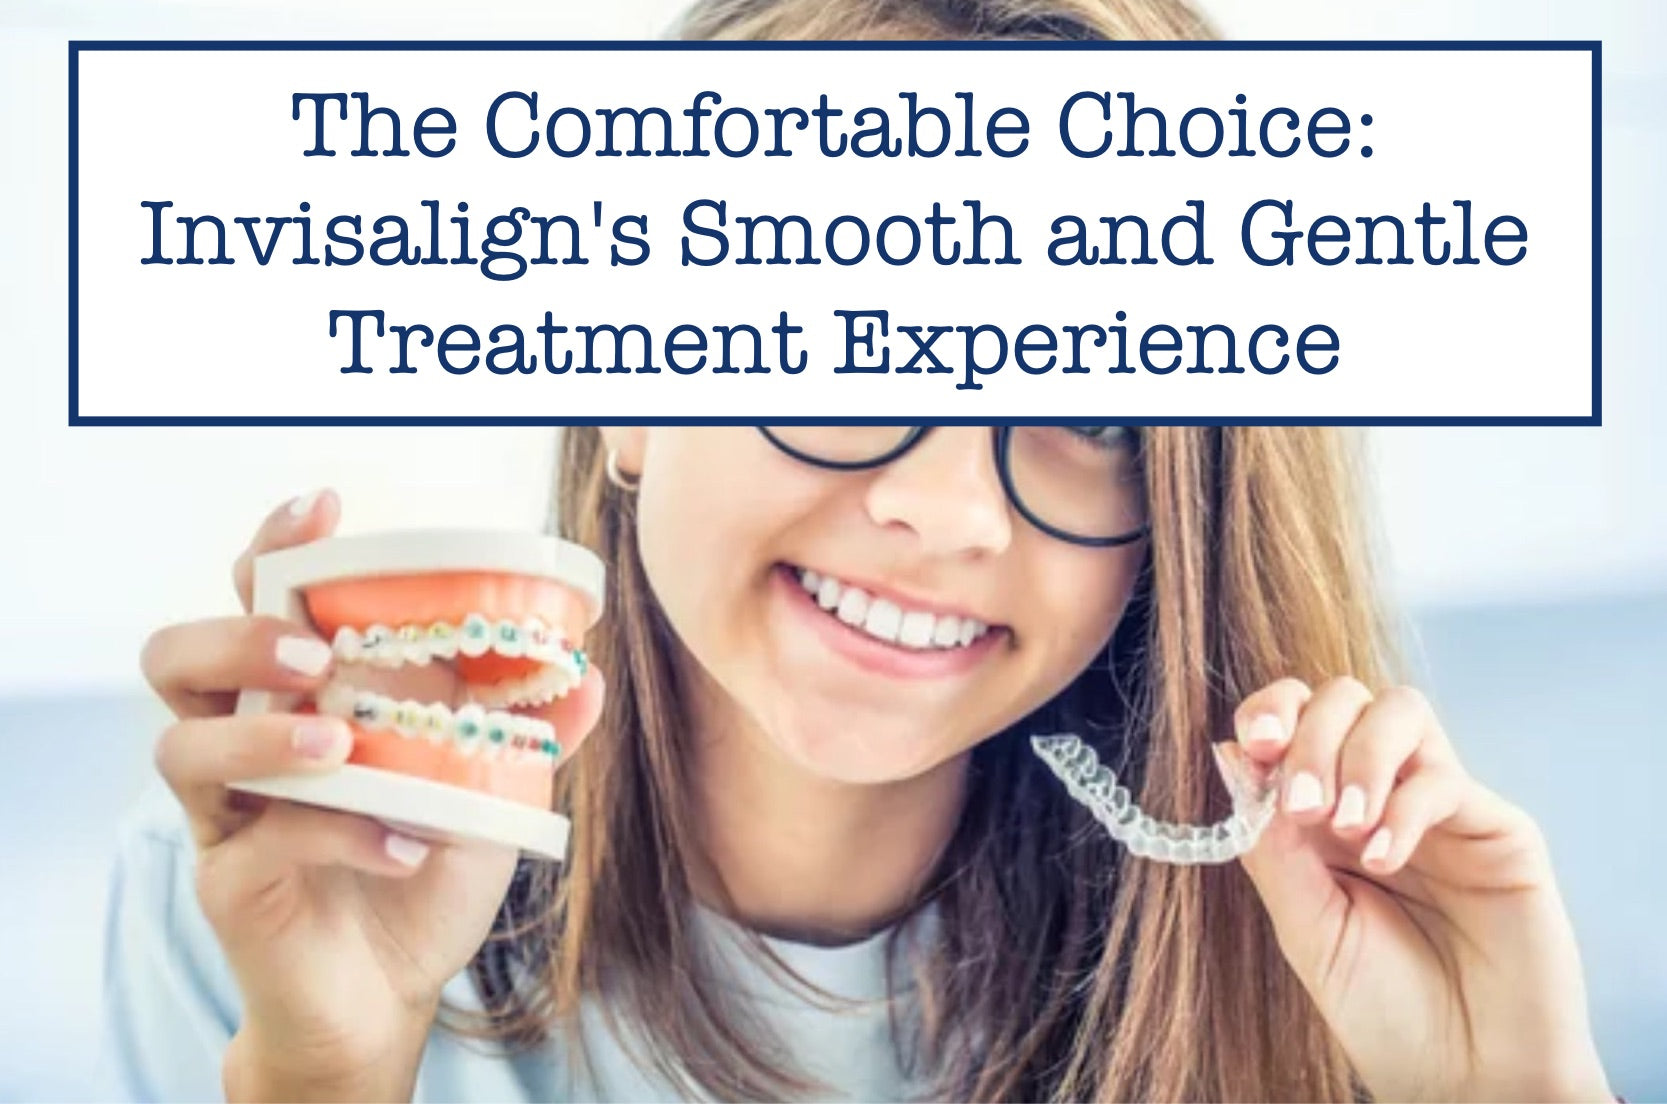 The Comfortable Choice: Invisalign's Smooth and Gentle Treatment Experience